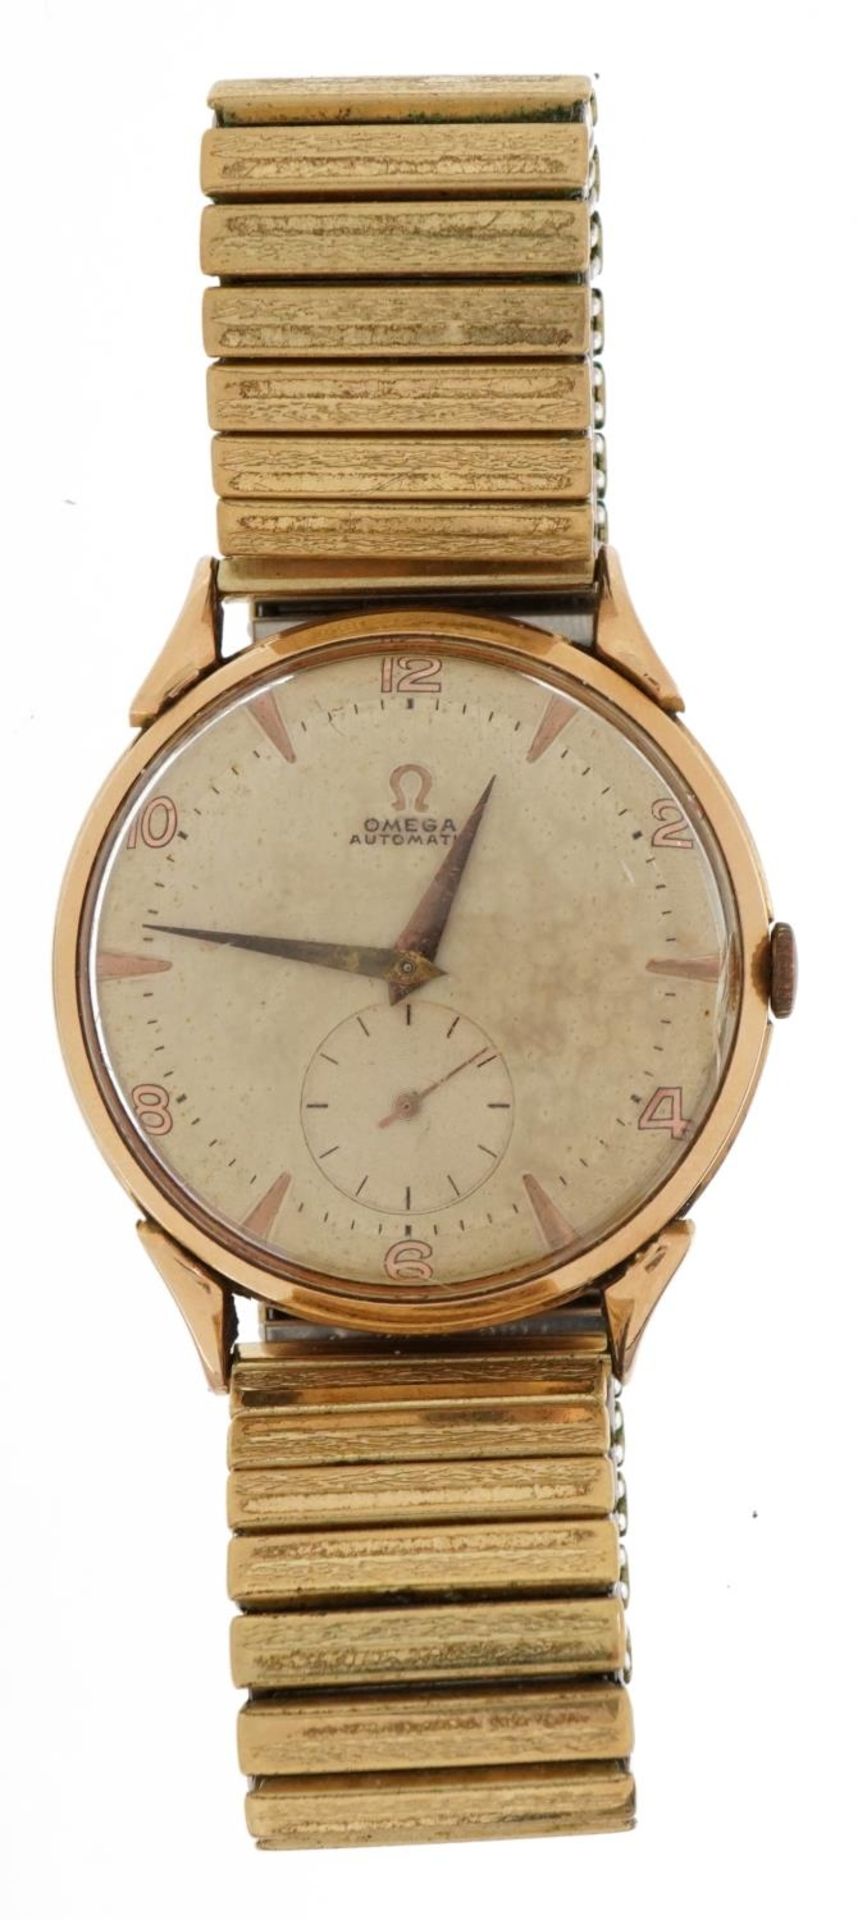 Omega, gentlemen's 18ct gold automatic wristwatch with subsidiary dial, total 60.5g - Image 2 of 4